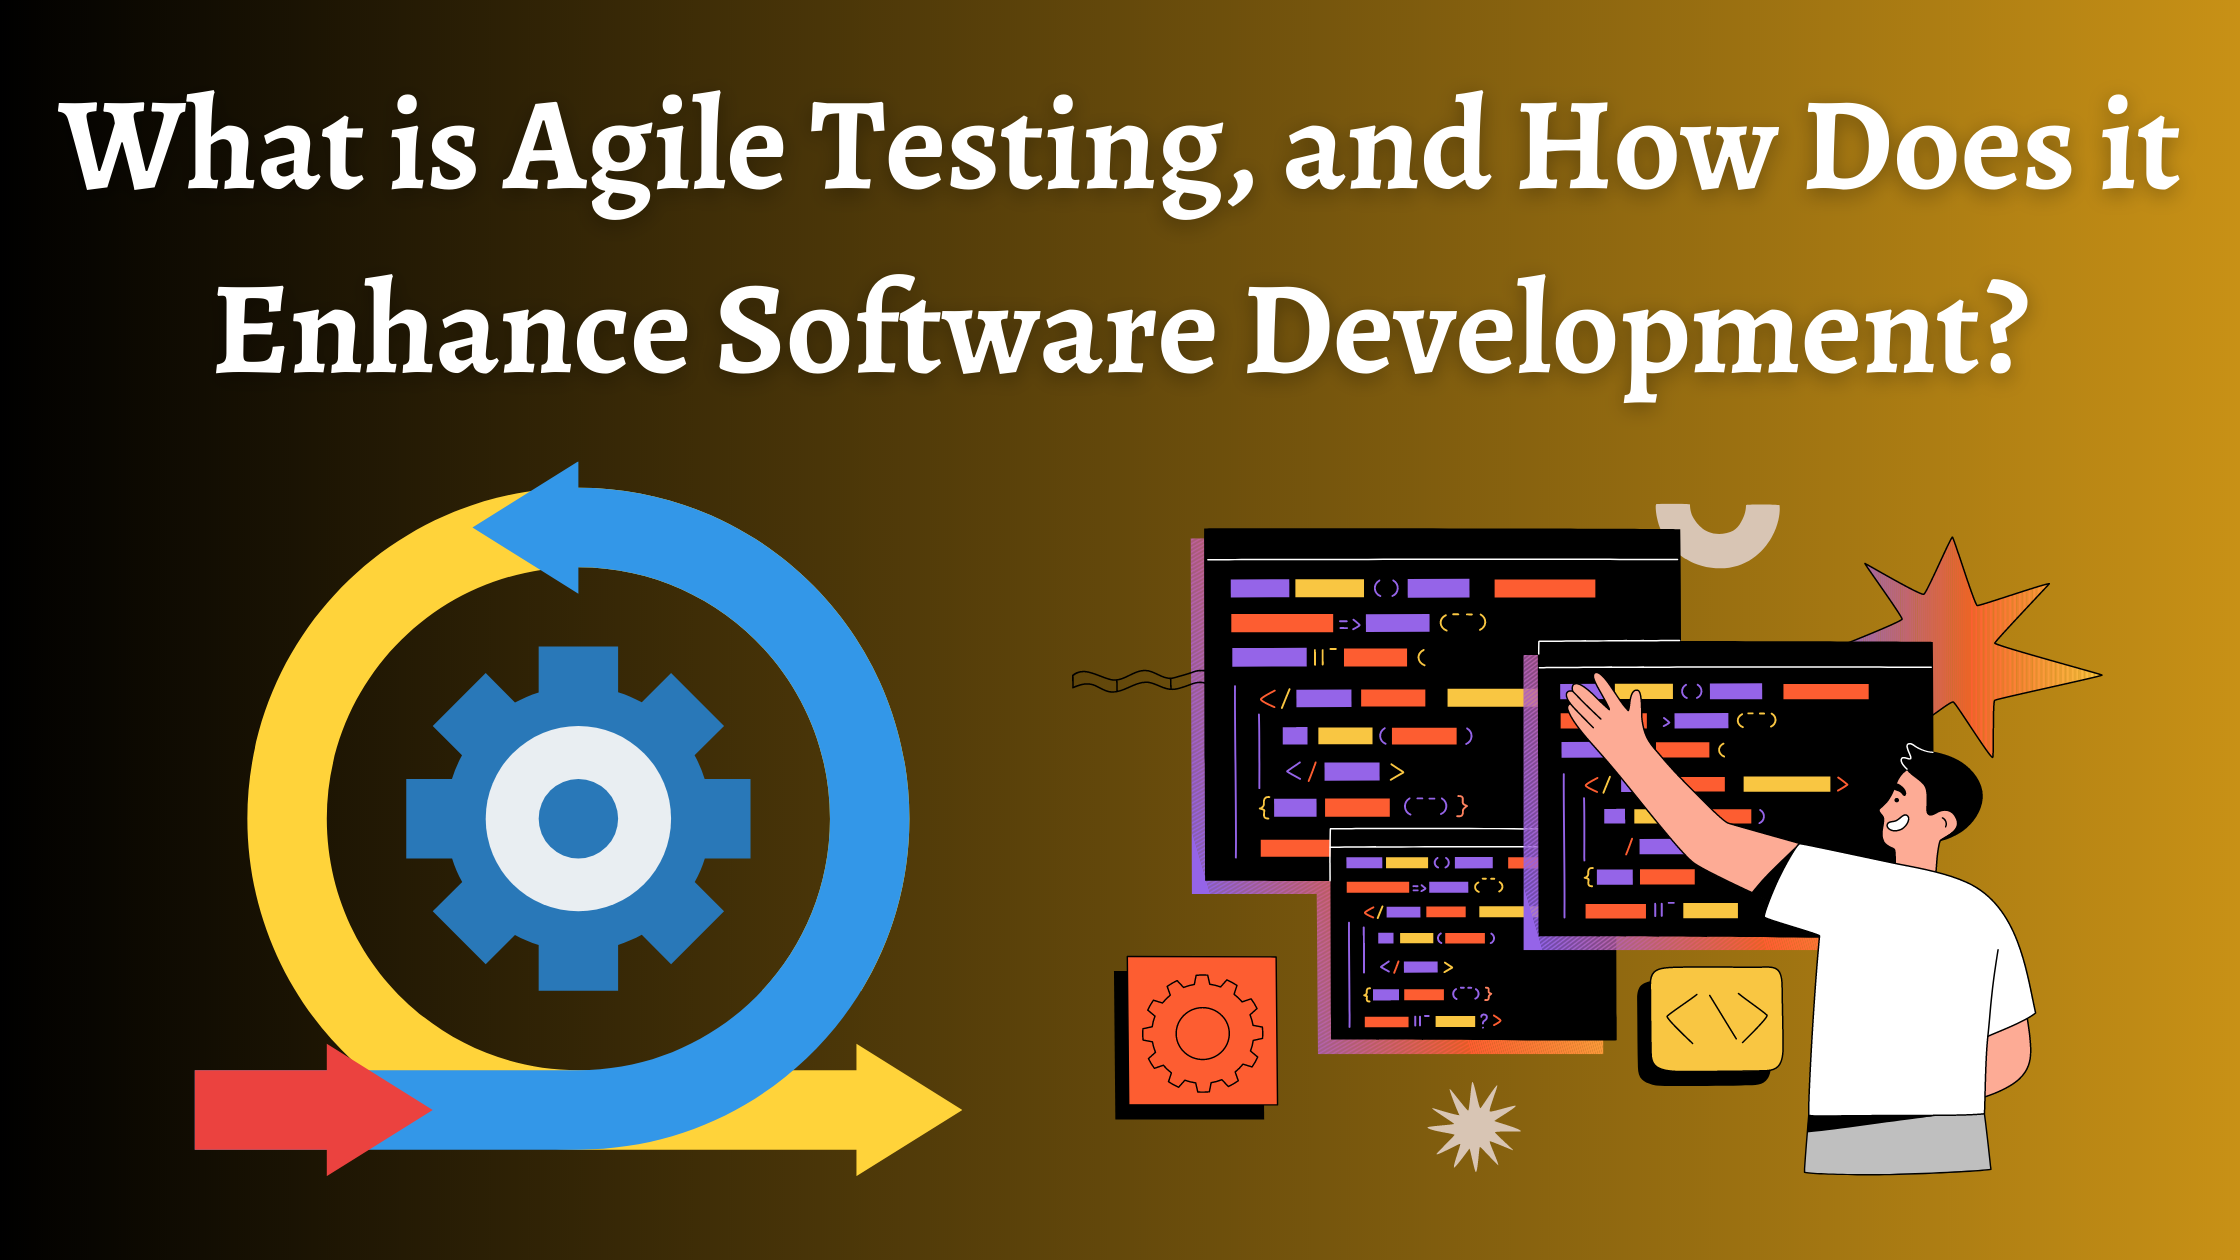 What is Agile Testing, and How Does it Enhance Software Development?